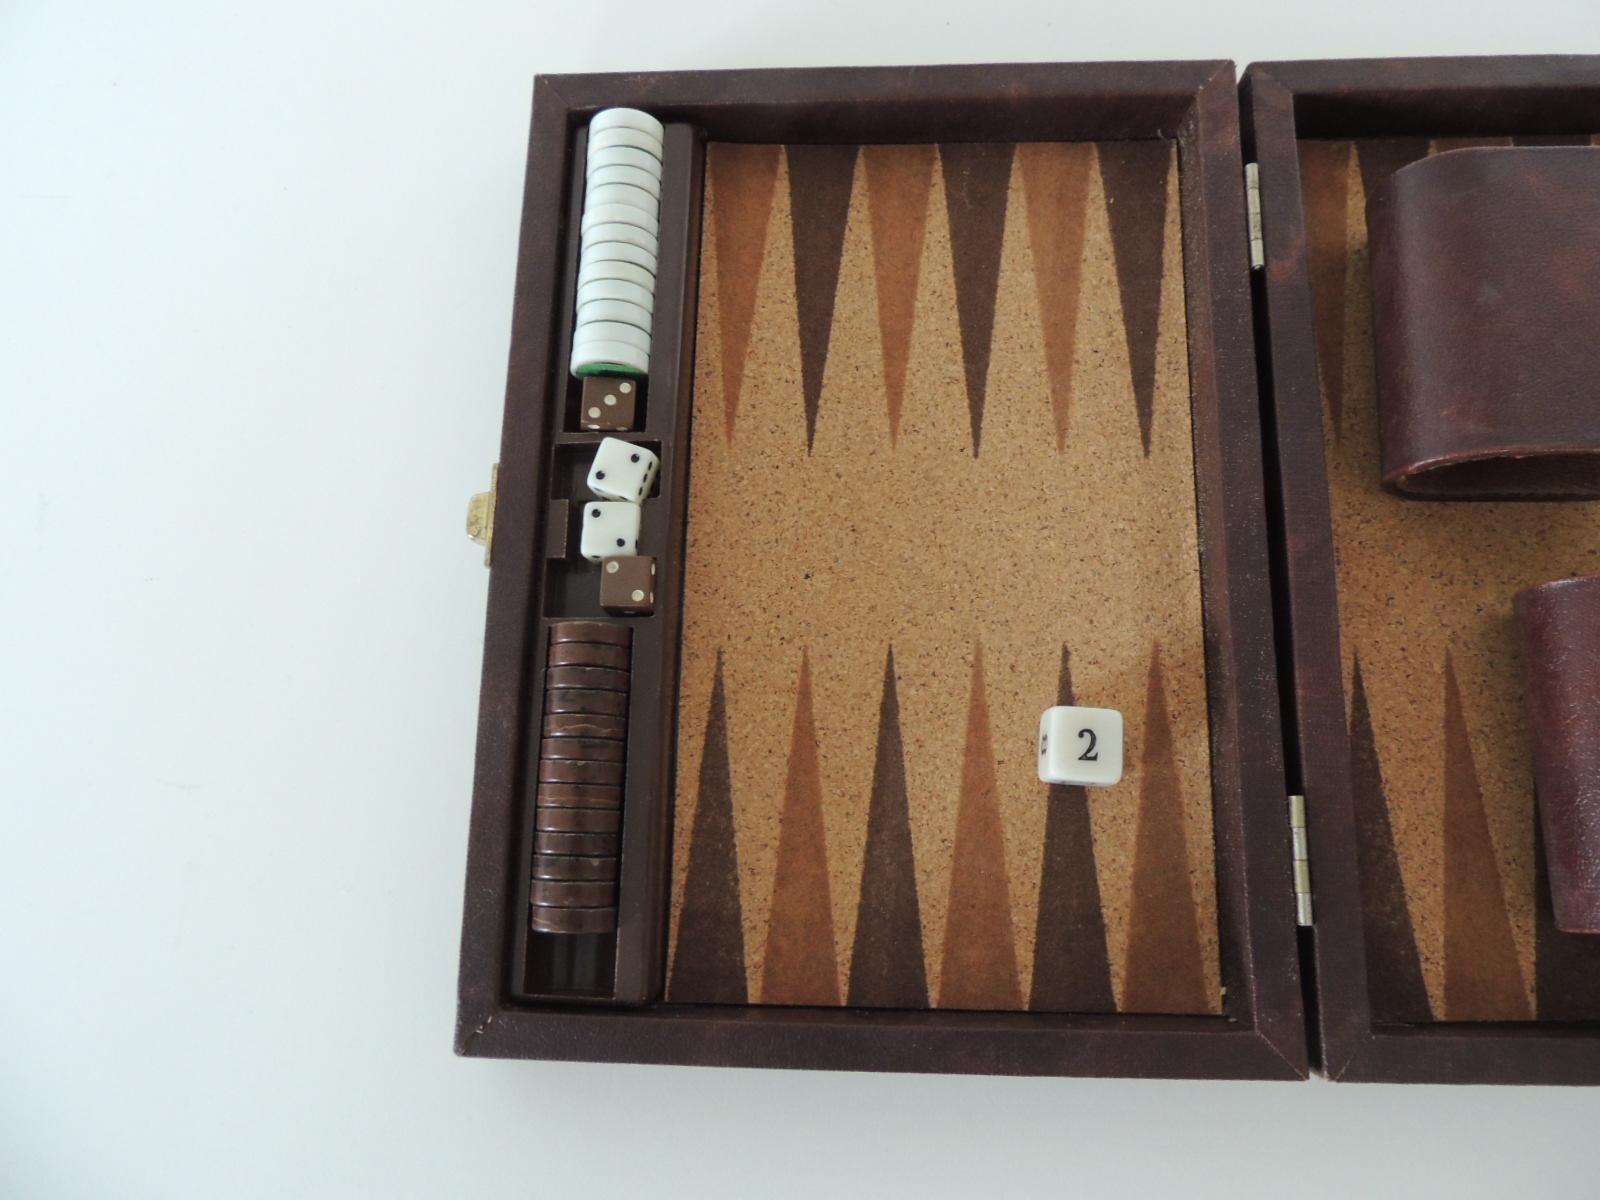 Vintage backgammon game in brown faux leather carrying case.
Size: 9